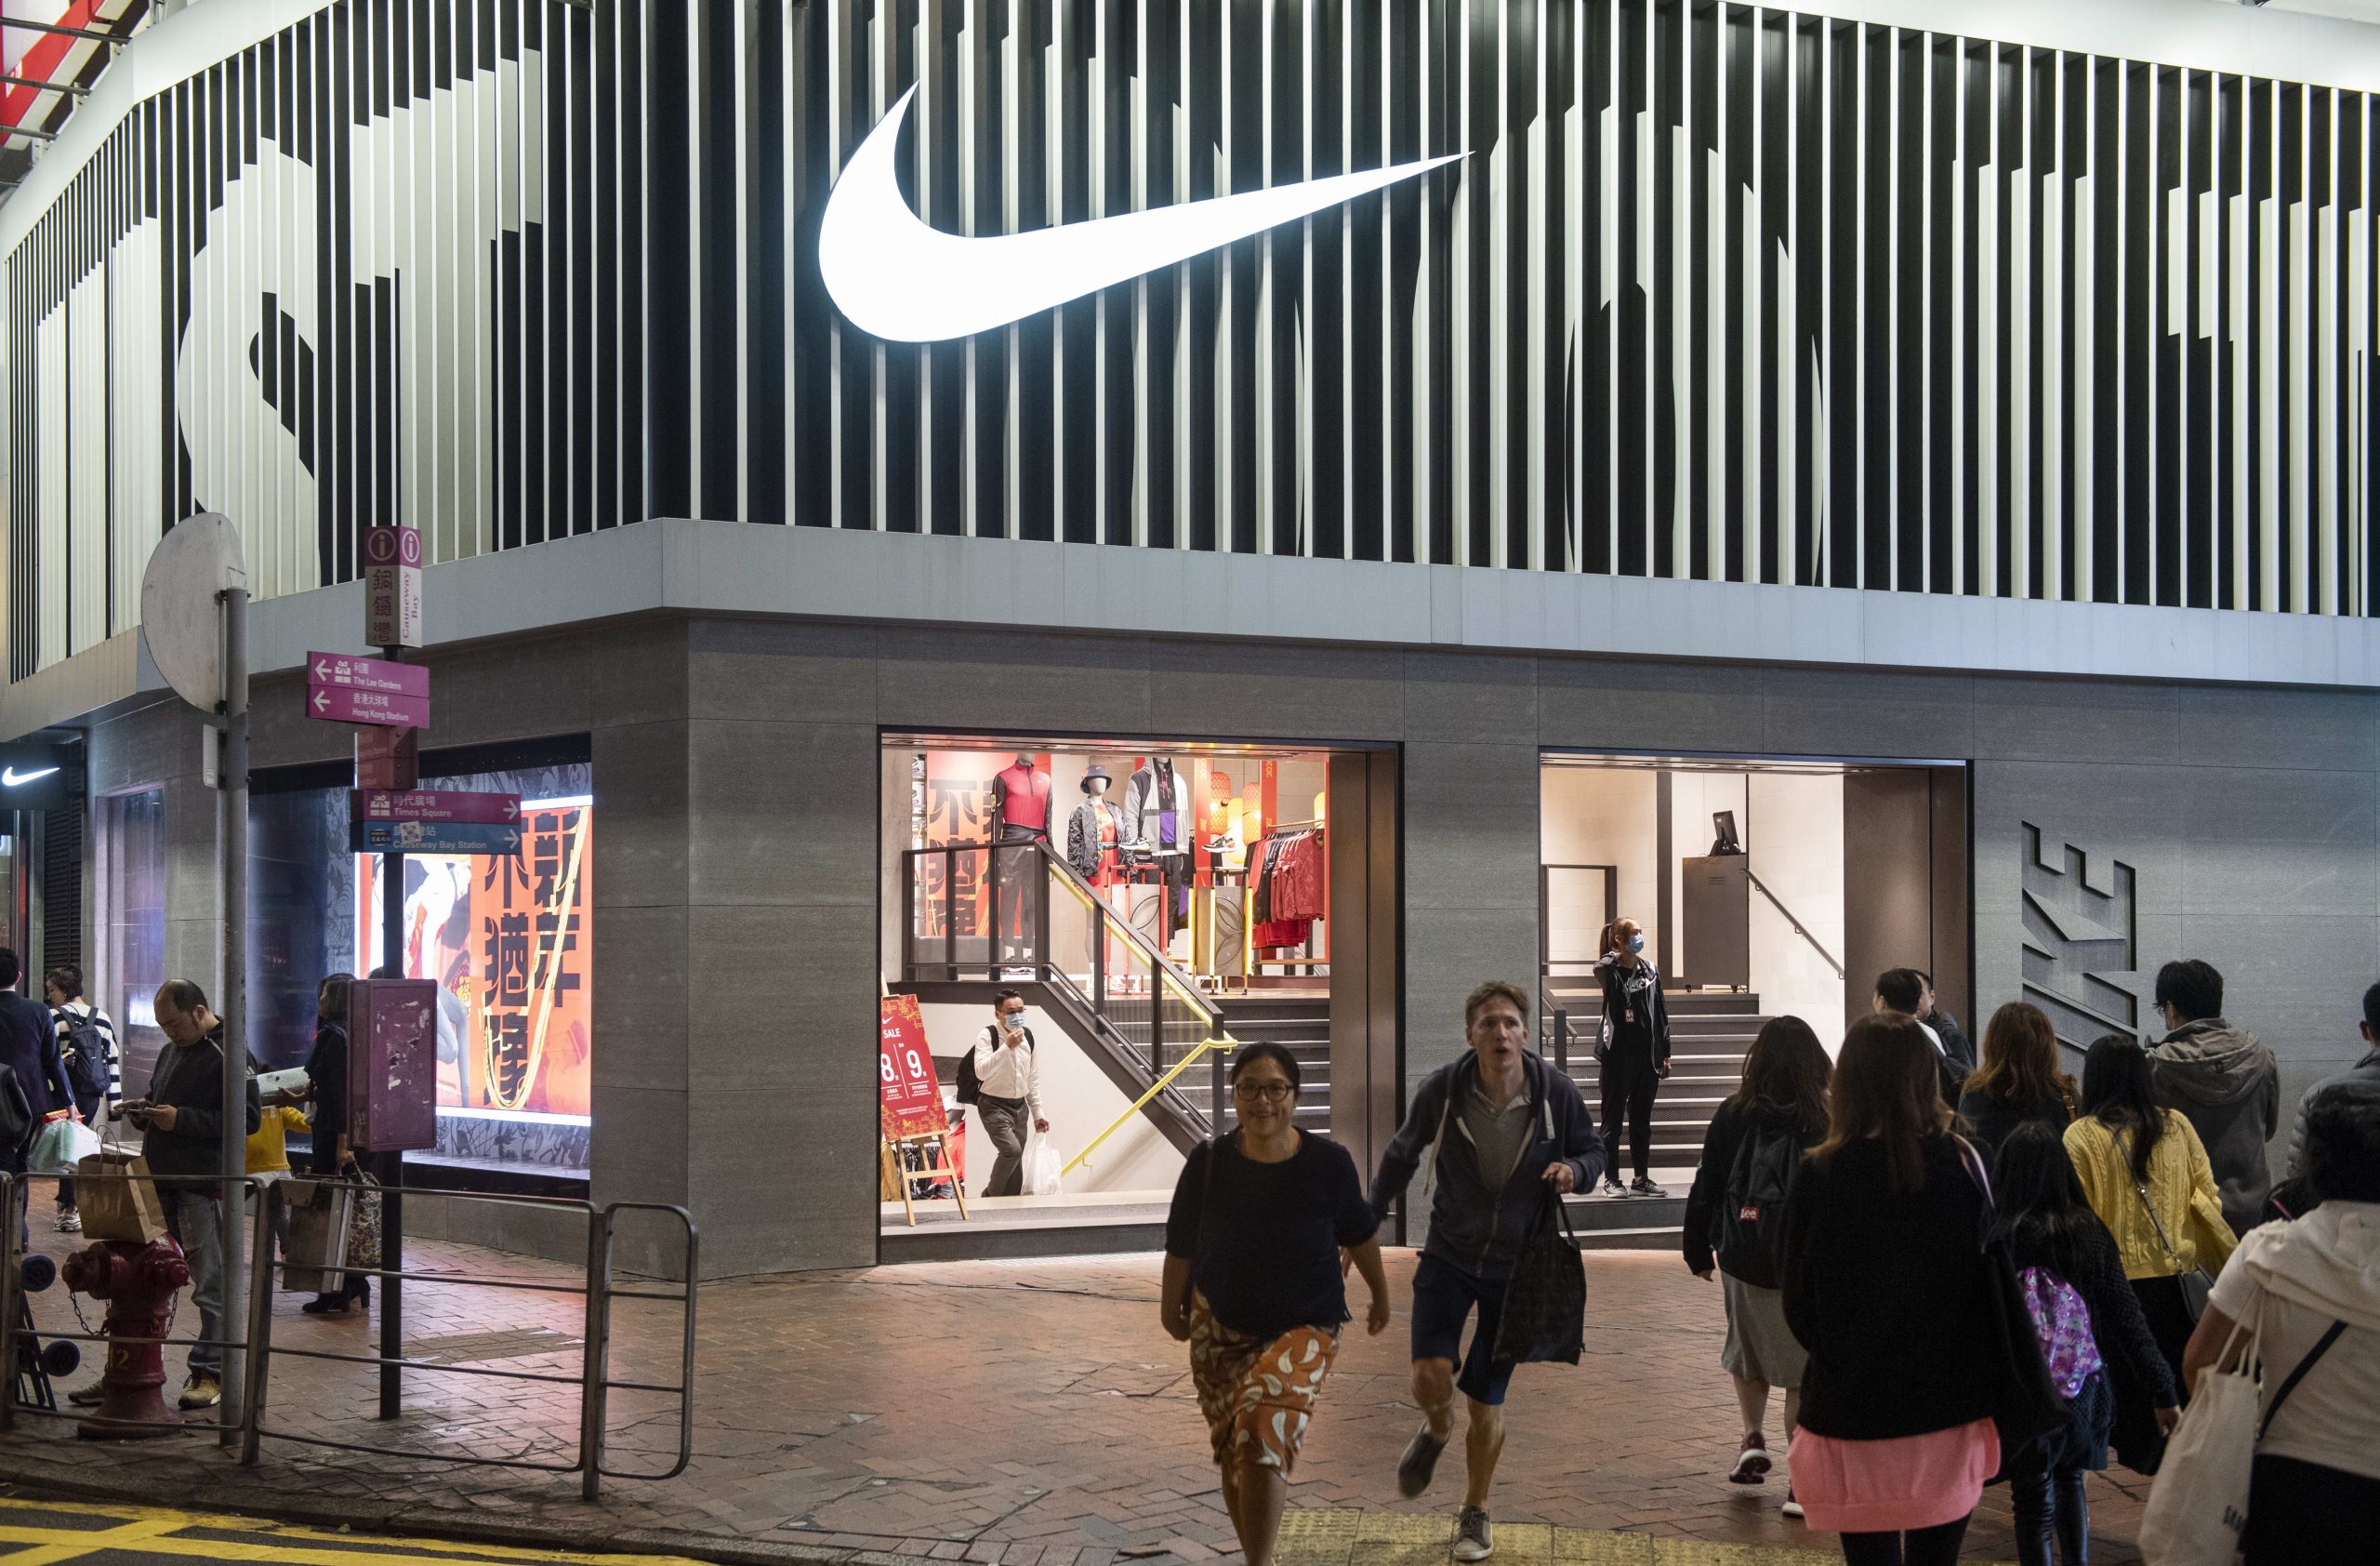 The Nike CEO says “digital is here to stay,” and e-business supports sales